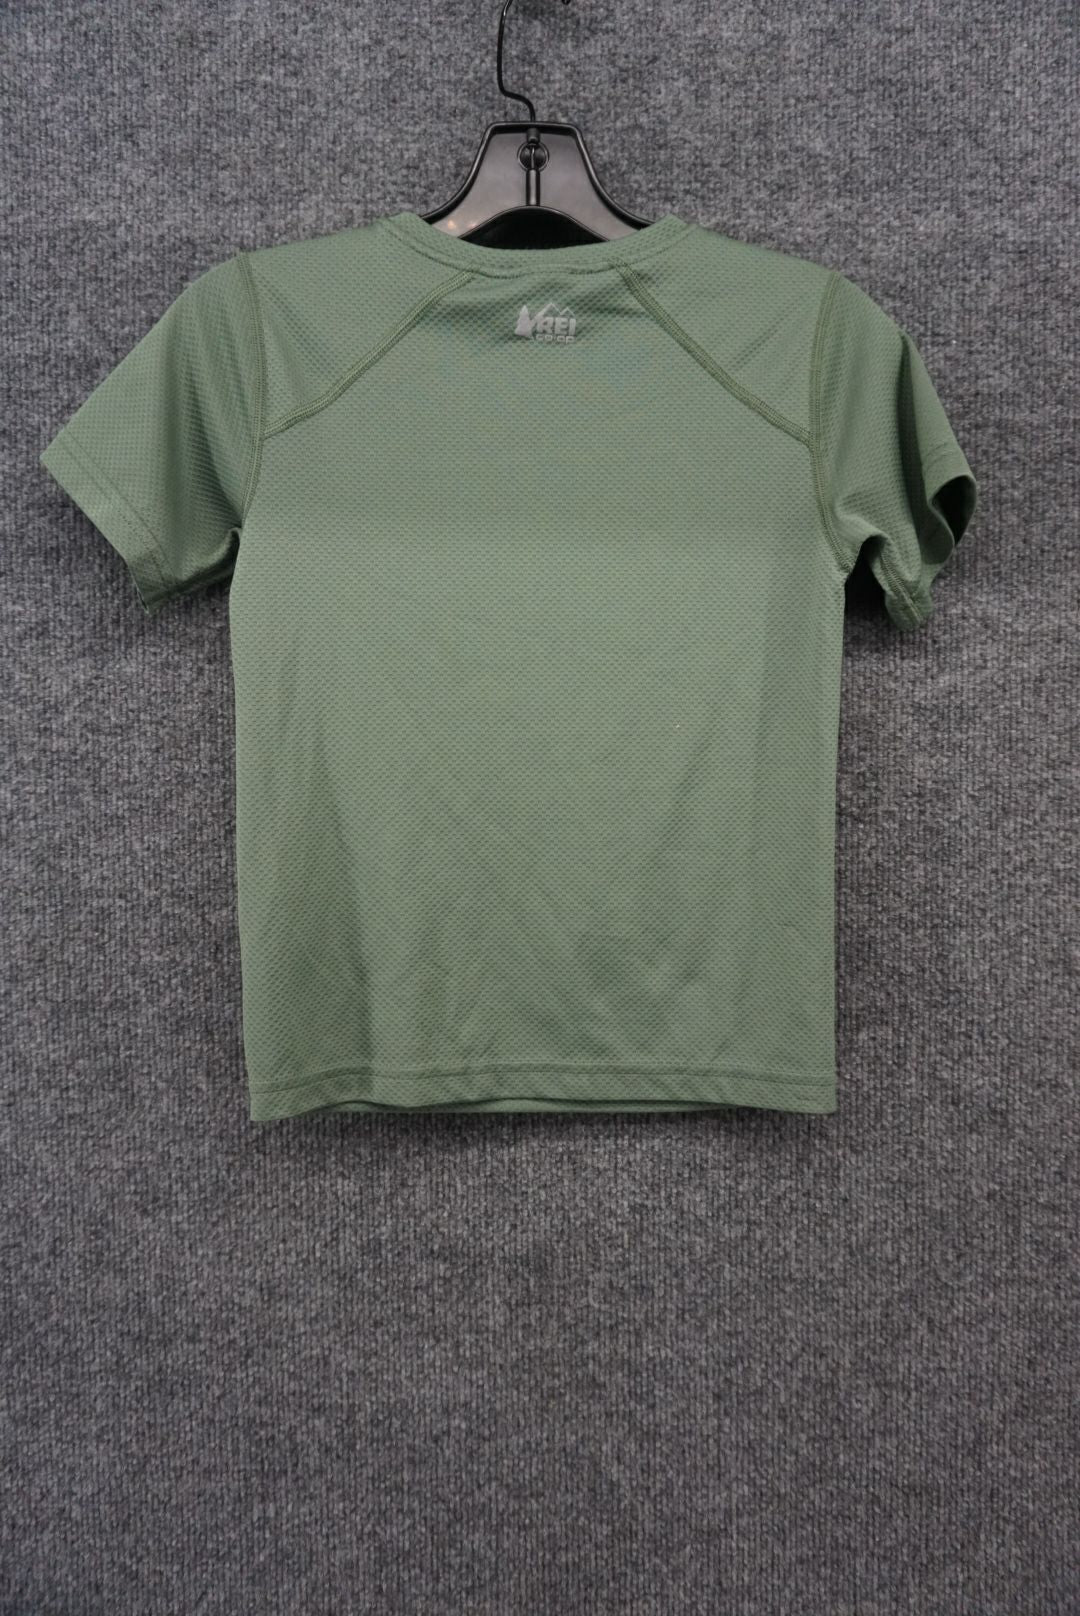 REI Size Y Small Youth S/S Active Top